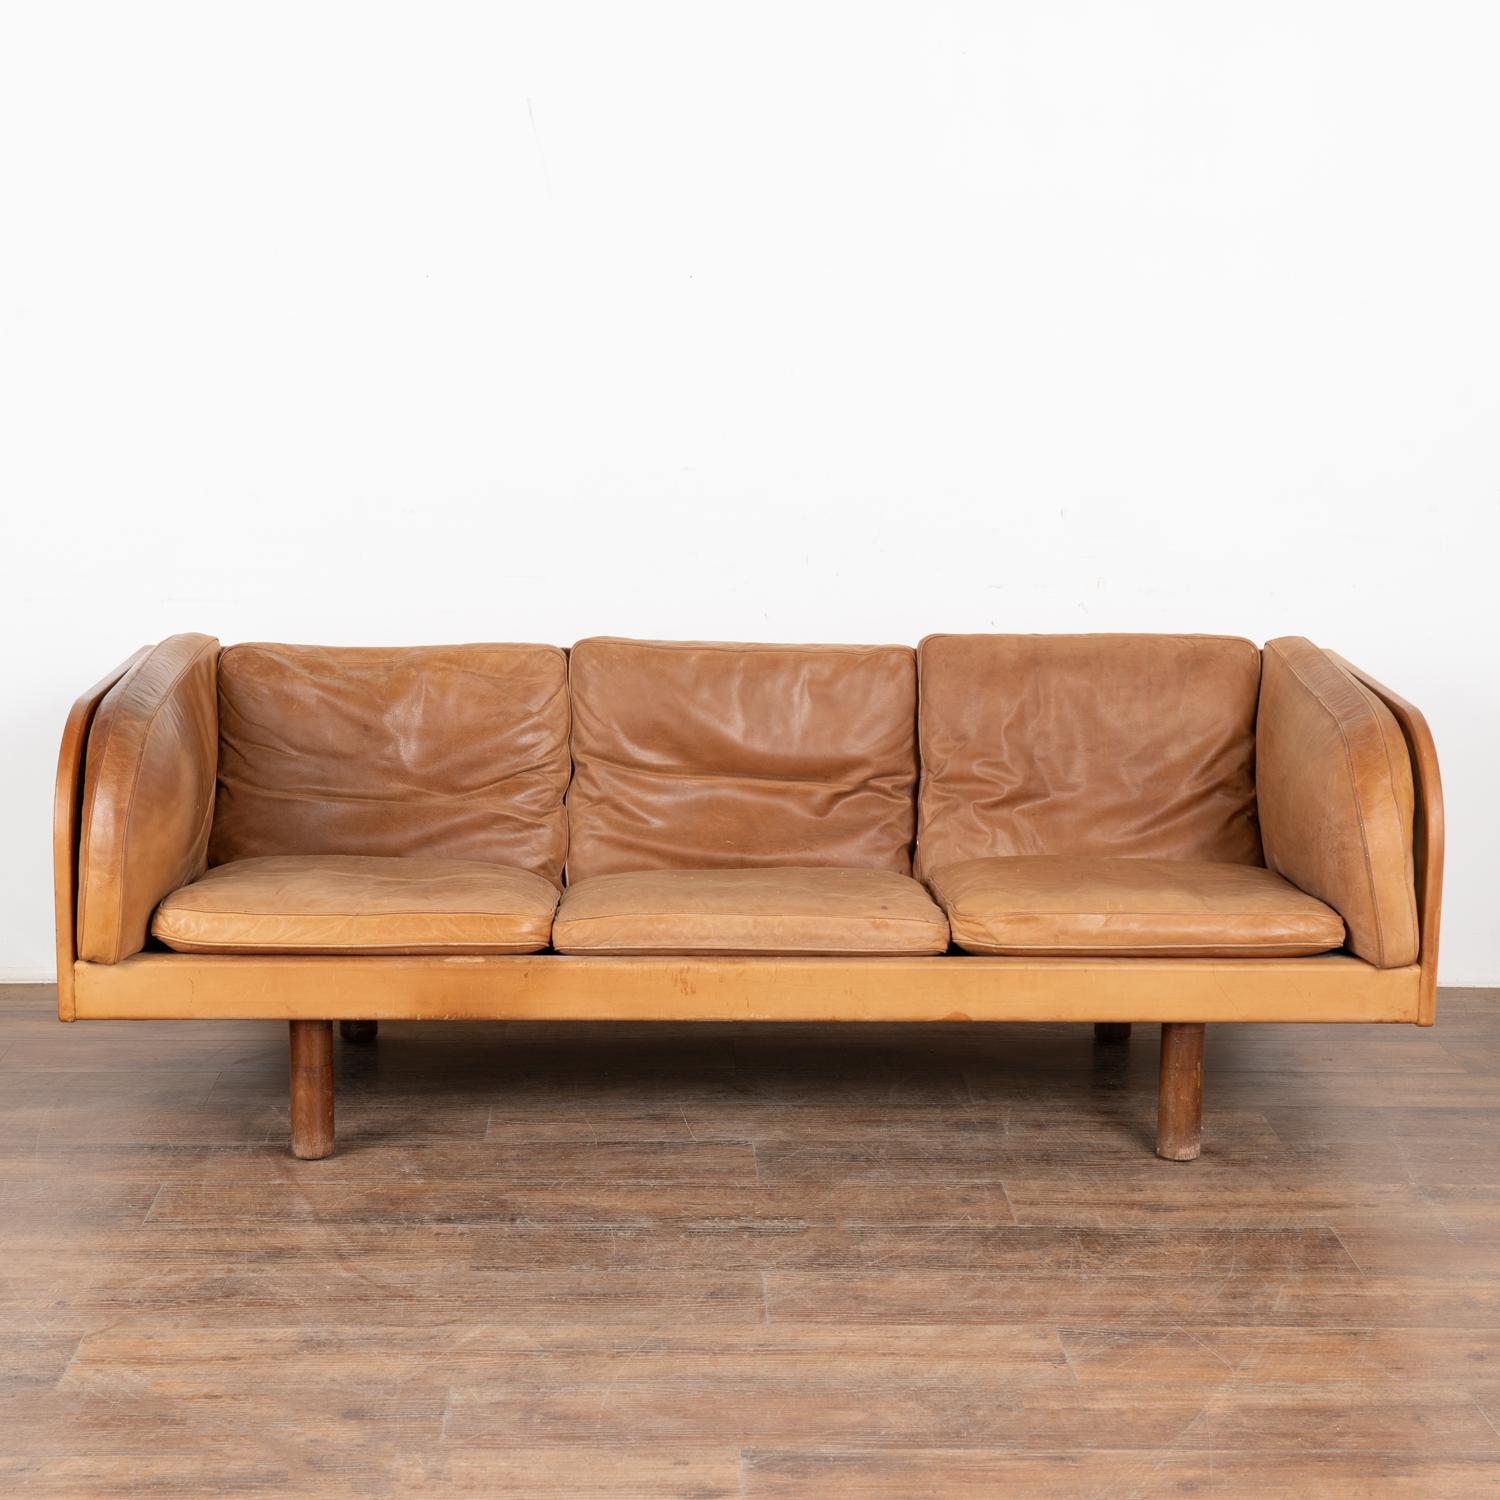 Mid-Century Modern Mid Century Modern Three Seat Sofa With Curved Arms, Denmark circa 1960 For Sale